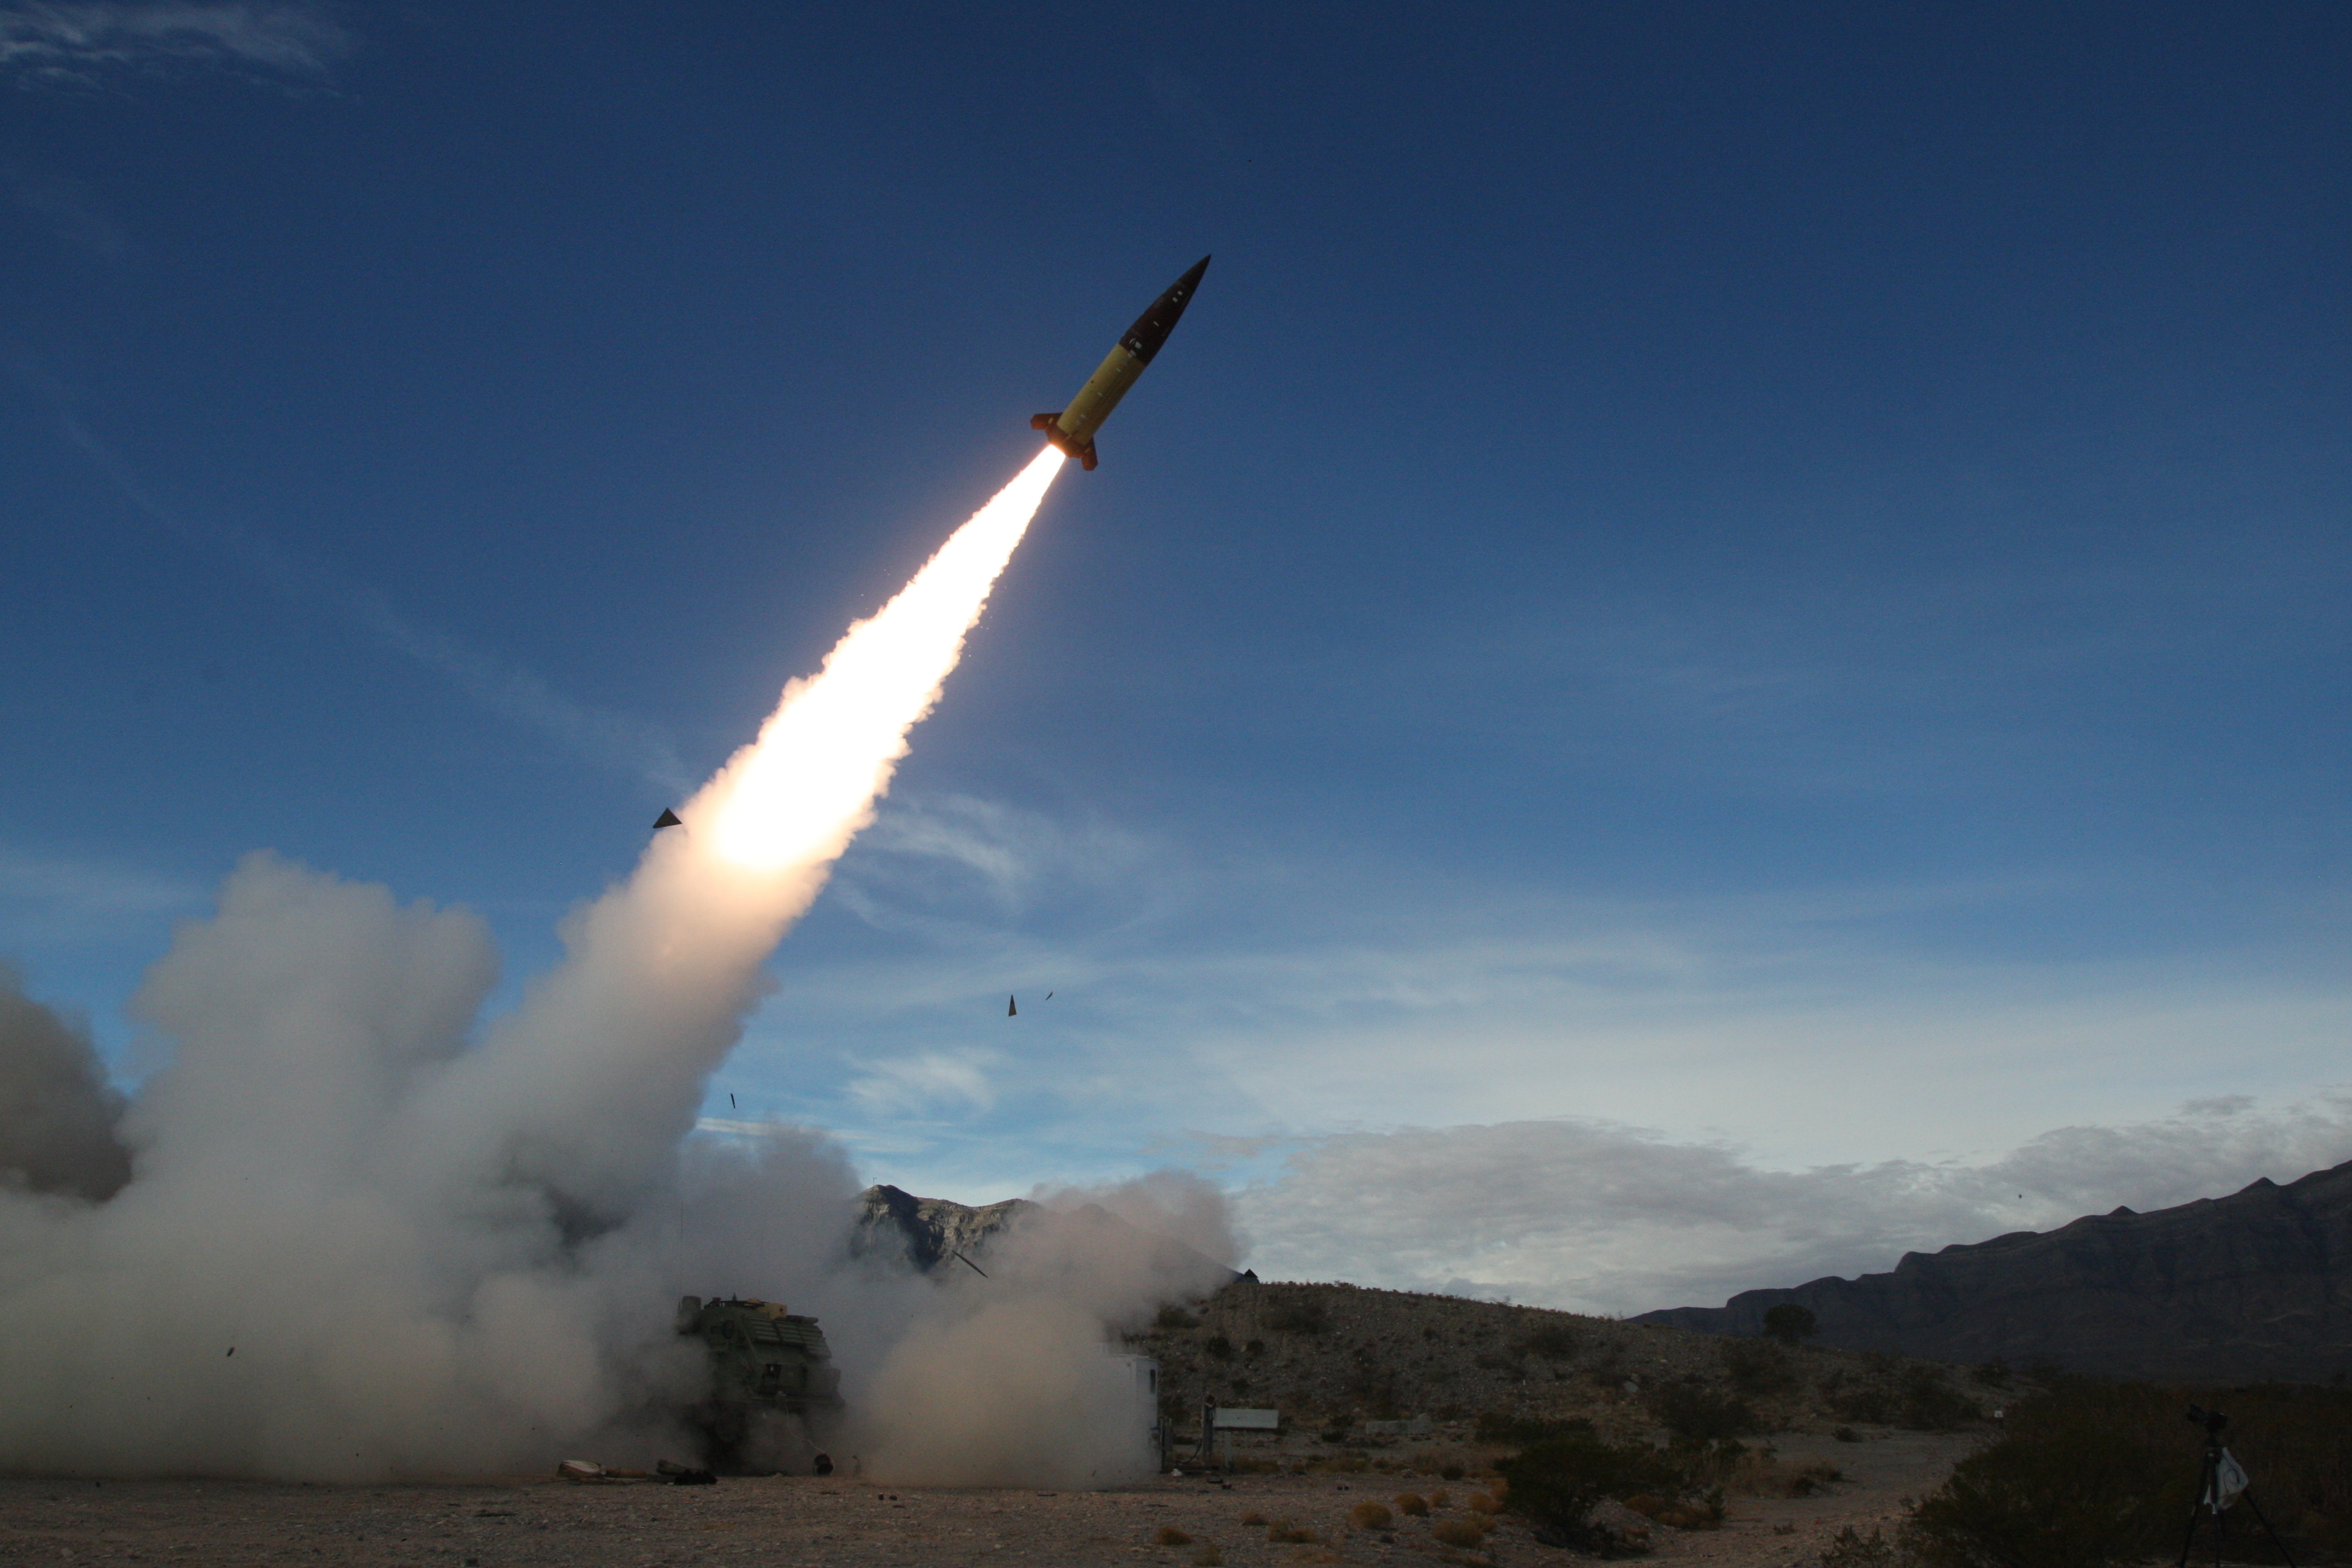 US soldiers conducting live fire testing of an ATACMS. The missile is taking off at an angle leaving a trail of fire and smoke.